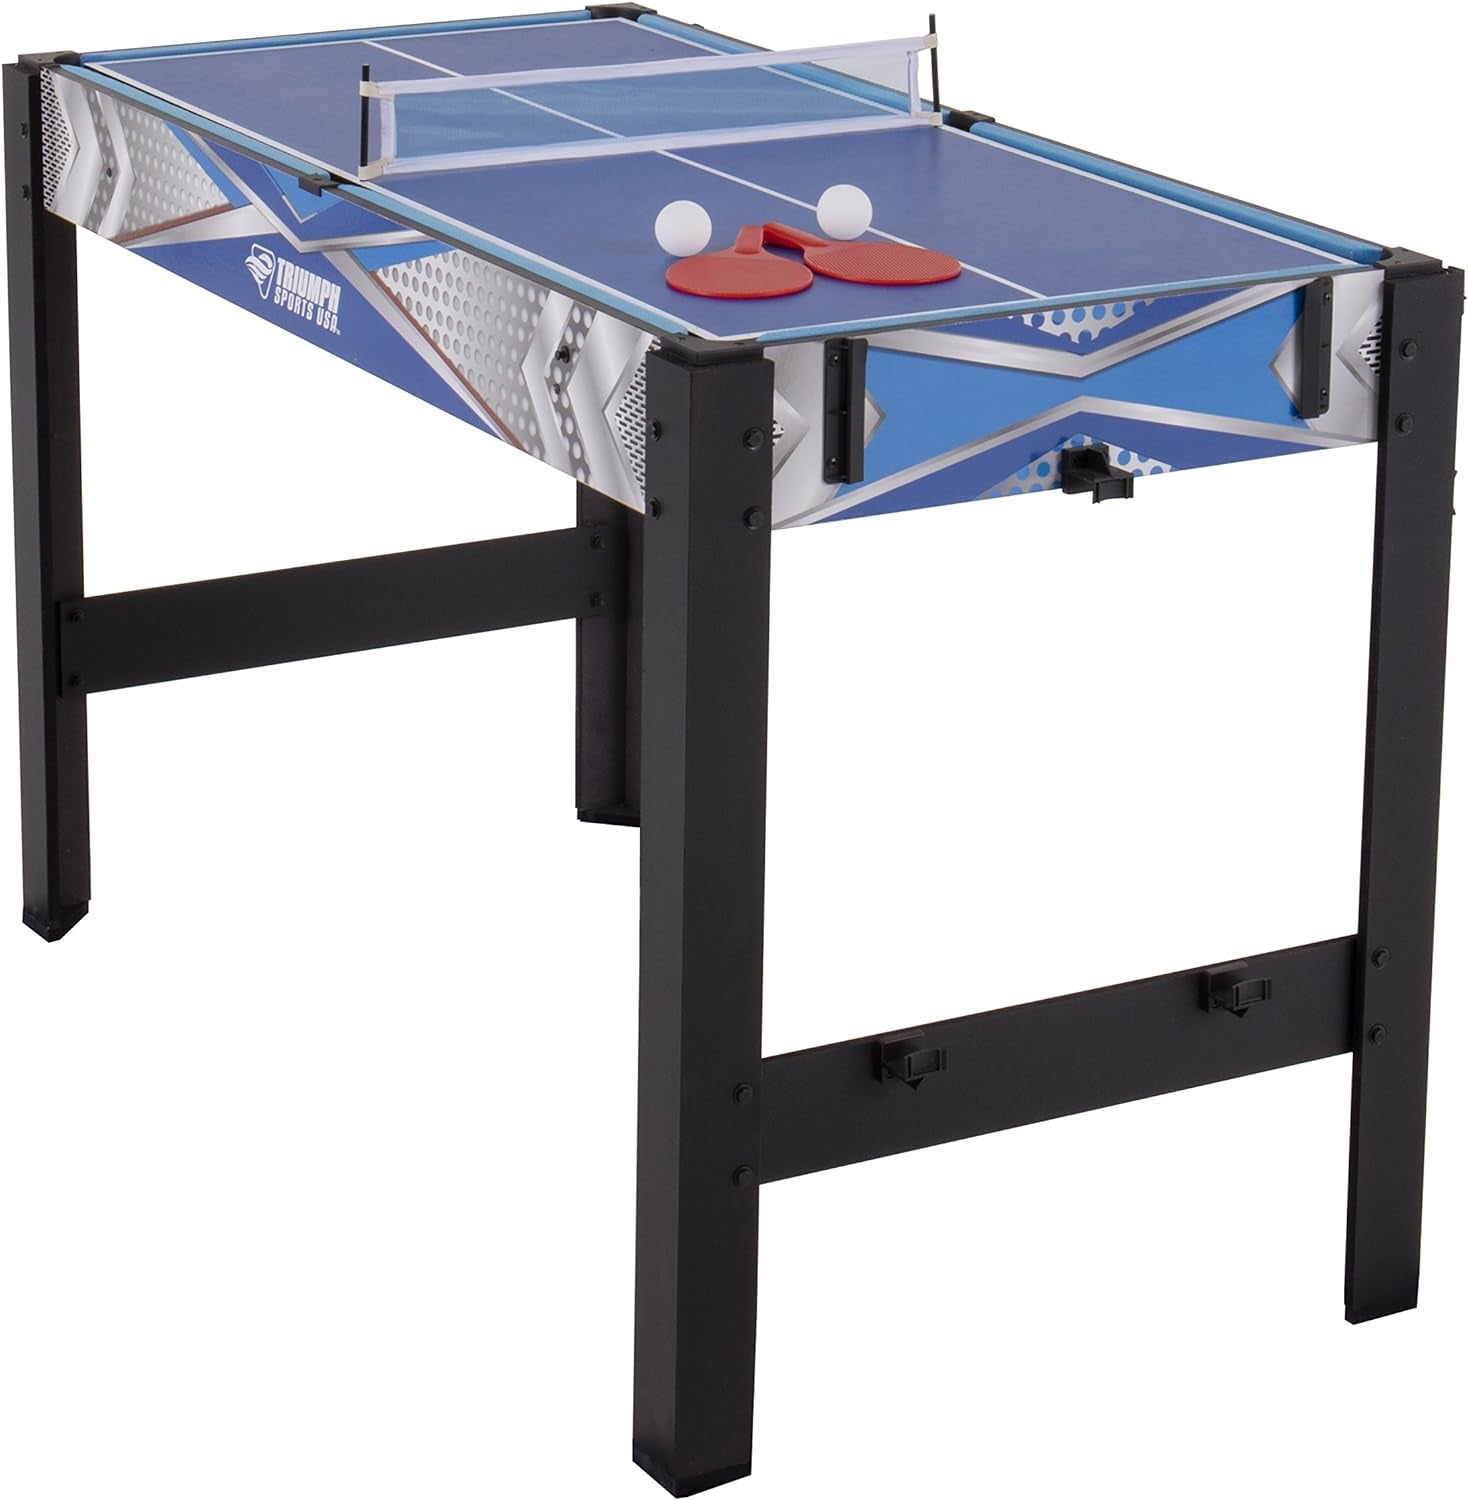 Triumph 13-In-1 Combo Game Table Includes Basketball, Table Tennis, Billiards, Push Hockey, Launch Football, Baseball, Tic-Tac-Toe, and Skee Bean Bag Toss